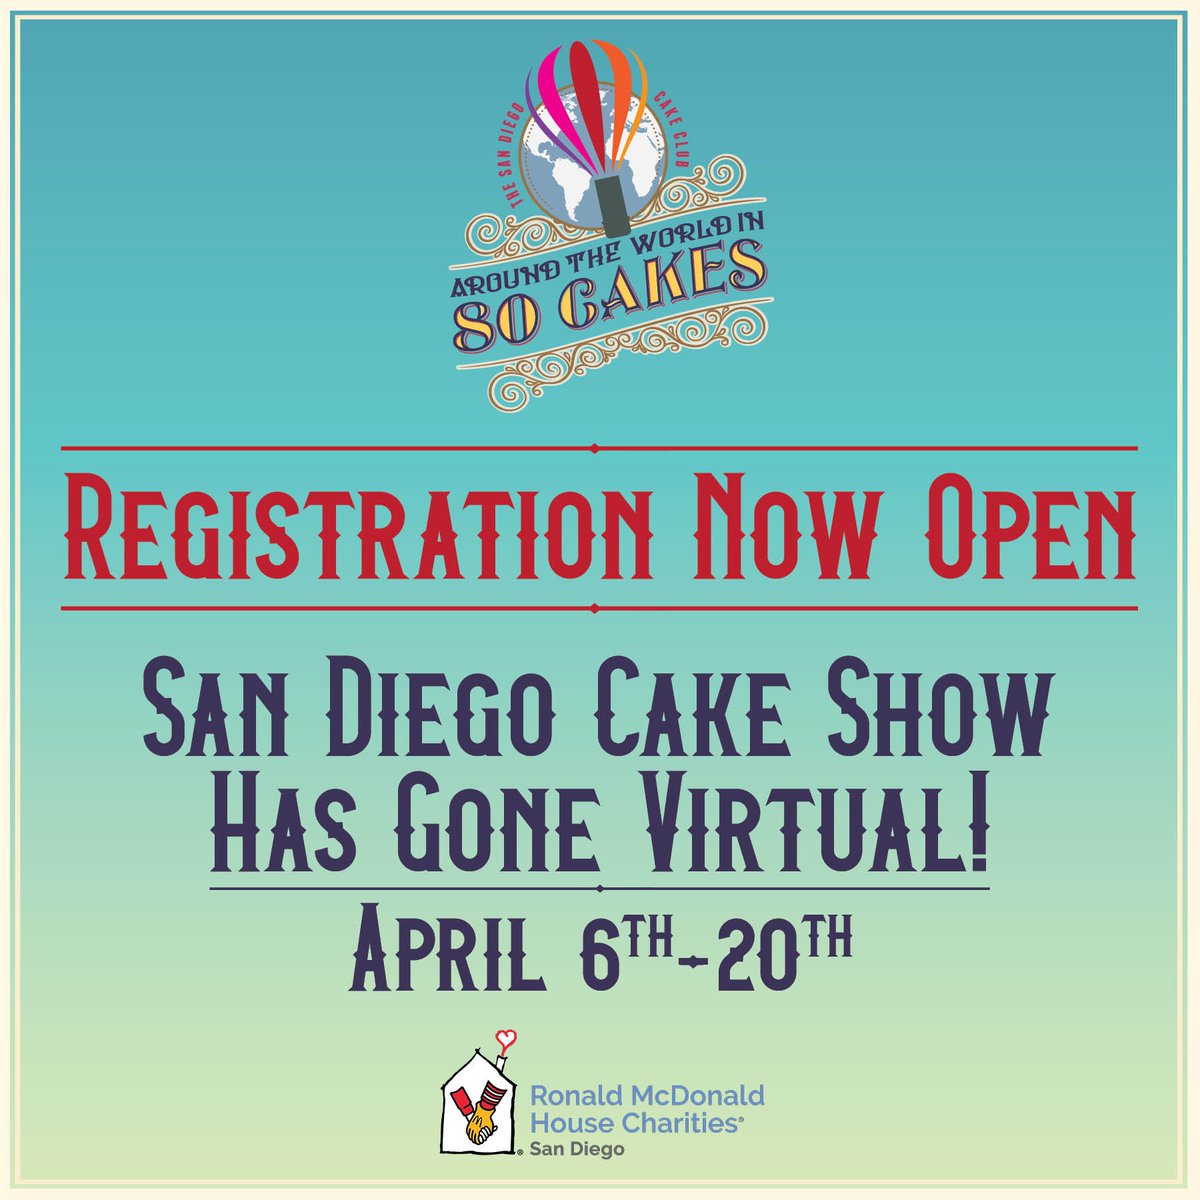 SAN DIEGO CAKE SHOW HAS GONE VIRTUAL 🎂🧁🍪⁠ Register Now - bit.ly/sandiegocakesh… Transform a family activity into an opportunity to give back to San Diego's Ronald McDonald House. 100% of funds raised will go supporting the families at RMHCSD #keepingfamiliesclose #cake